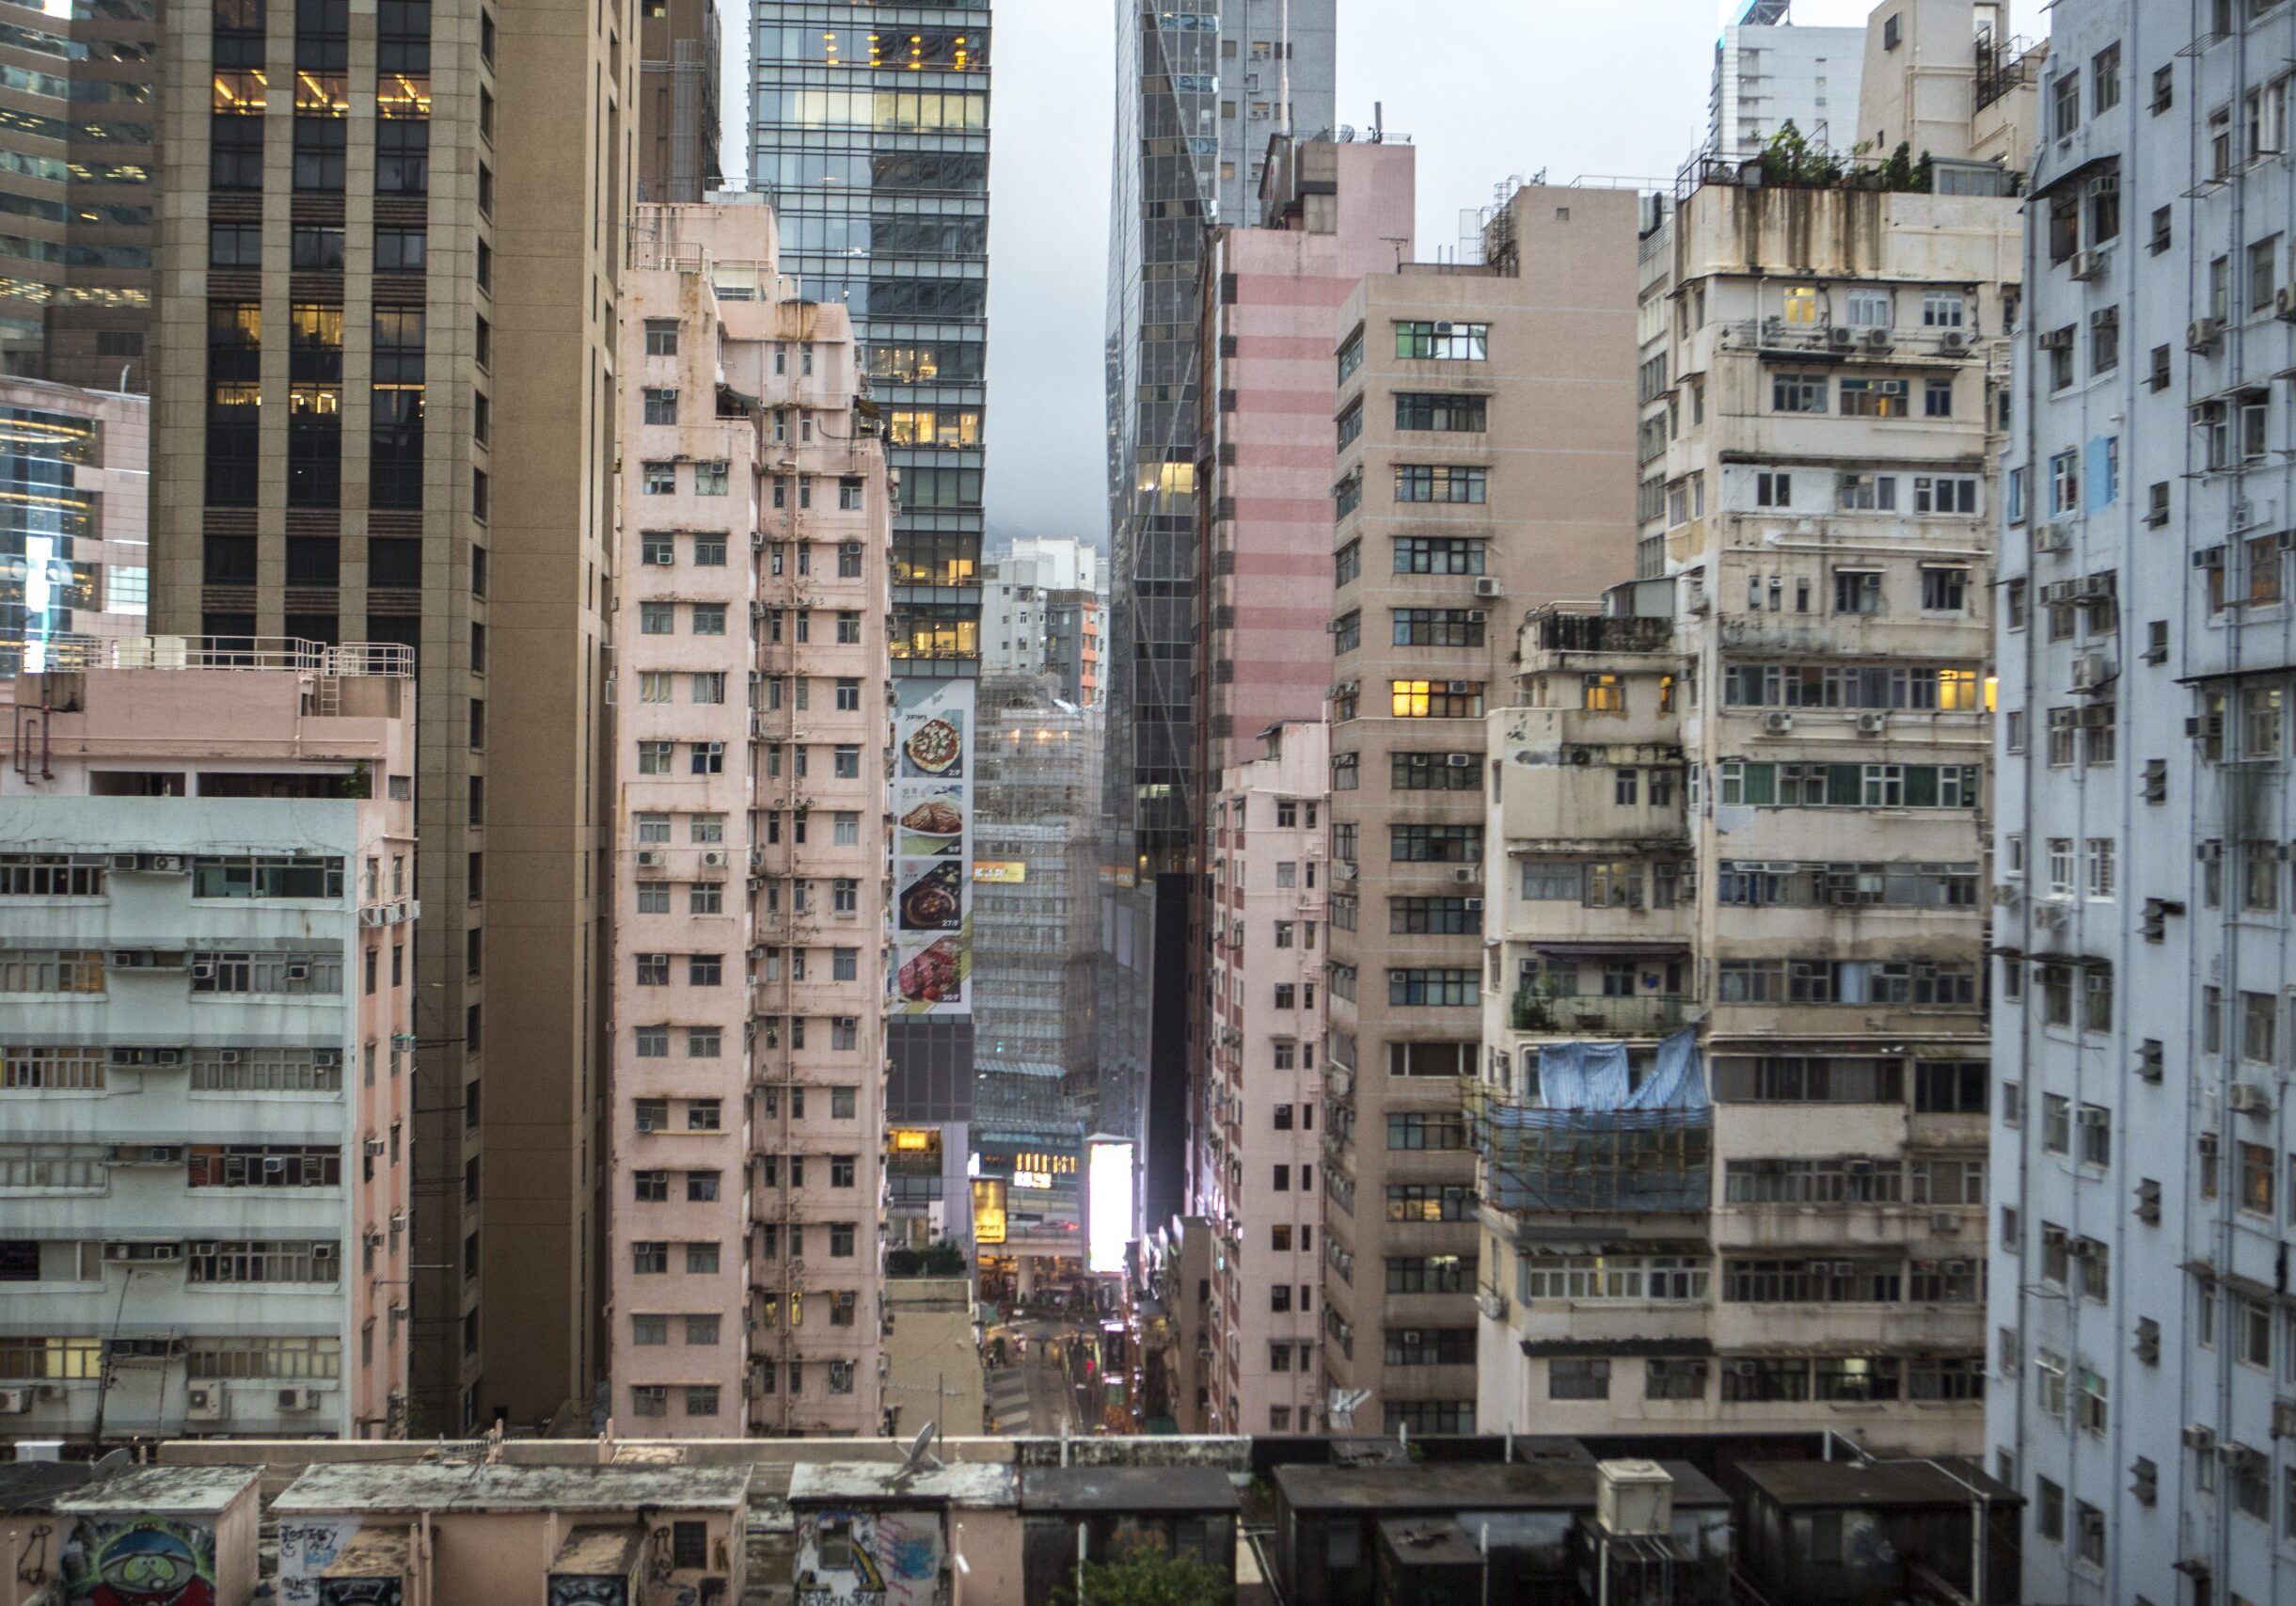 According to studies conducted by the Hong Kong Observatory, urbanization contributes about 50% of the warming in cities like Hong Kong. Concrete buildings store heat in the day and release it in the night, unbalancing the normal day and night cooling cycle. in addition, tall building block air circulation and reduce wind speed.